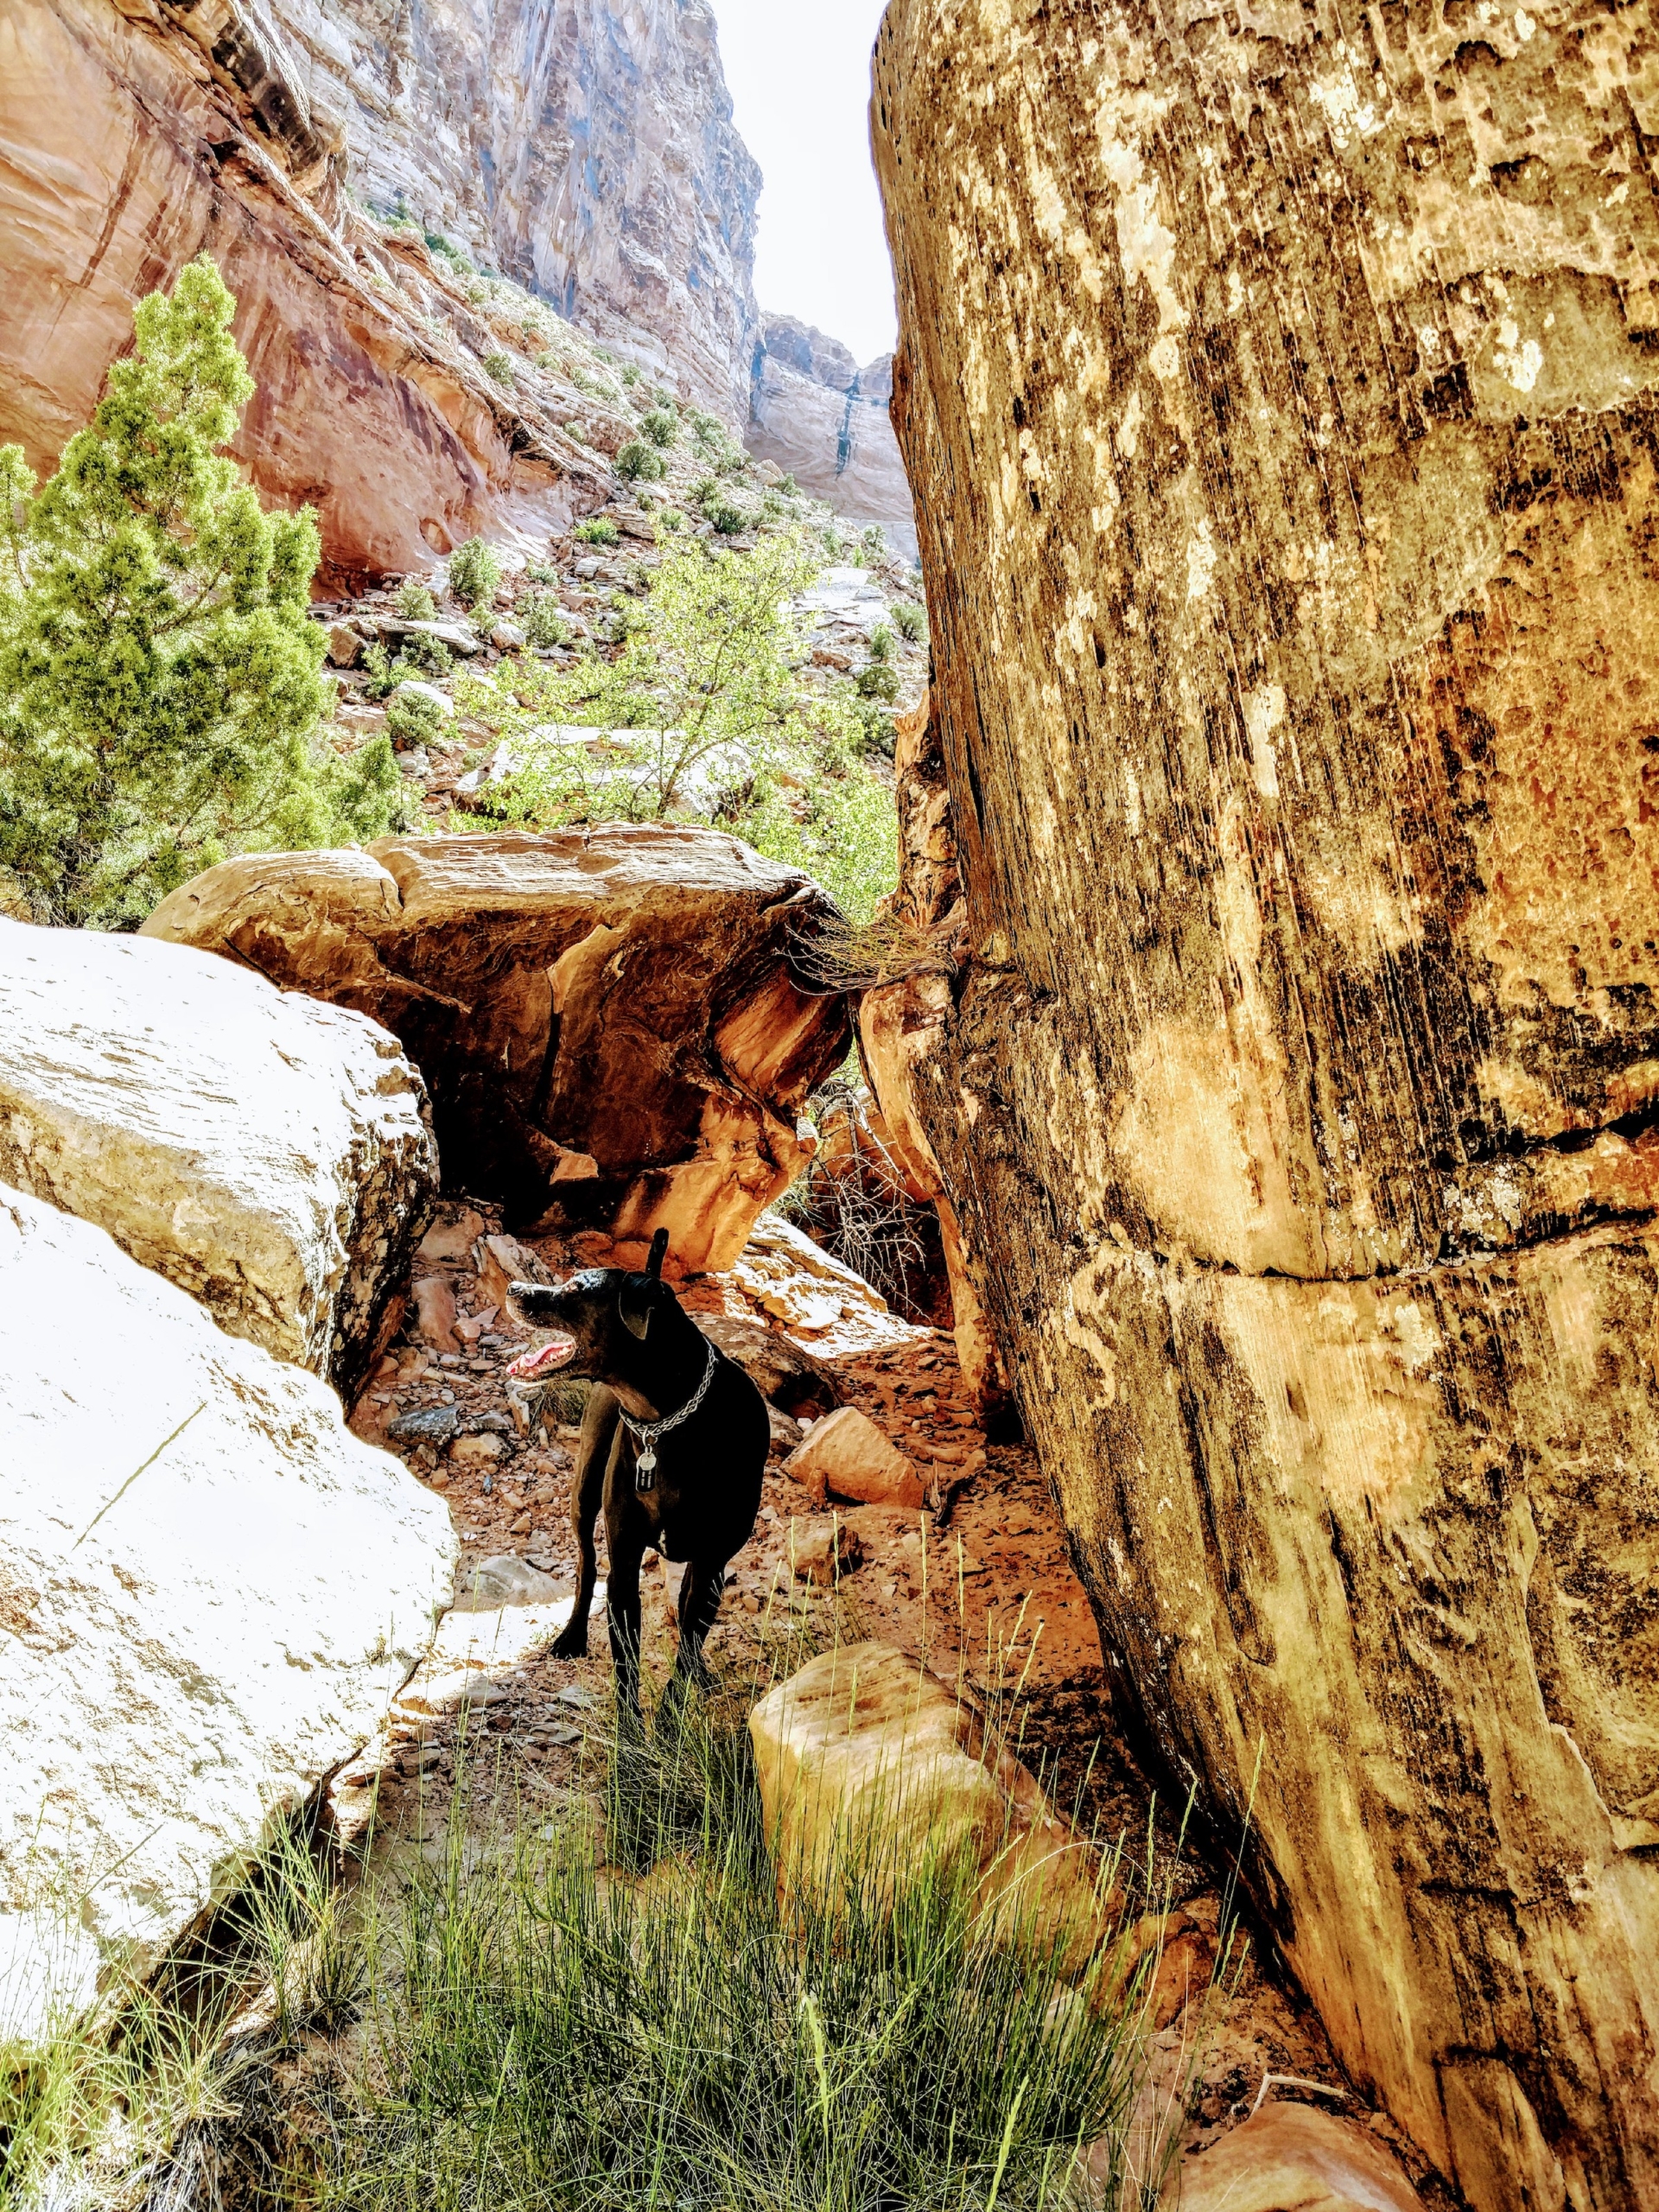 a black dog stands in the water beneath large rocks, in a canyon